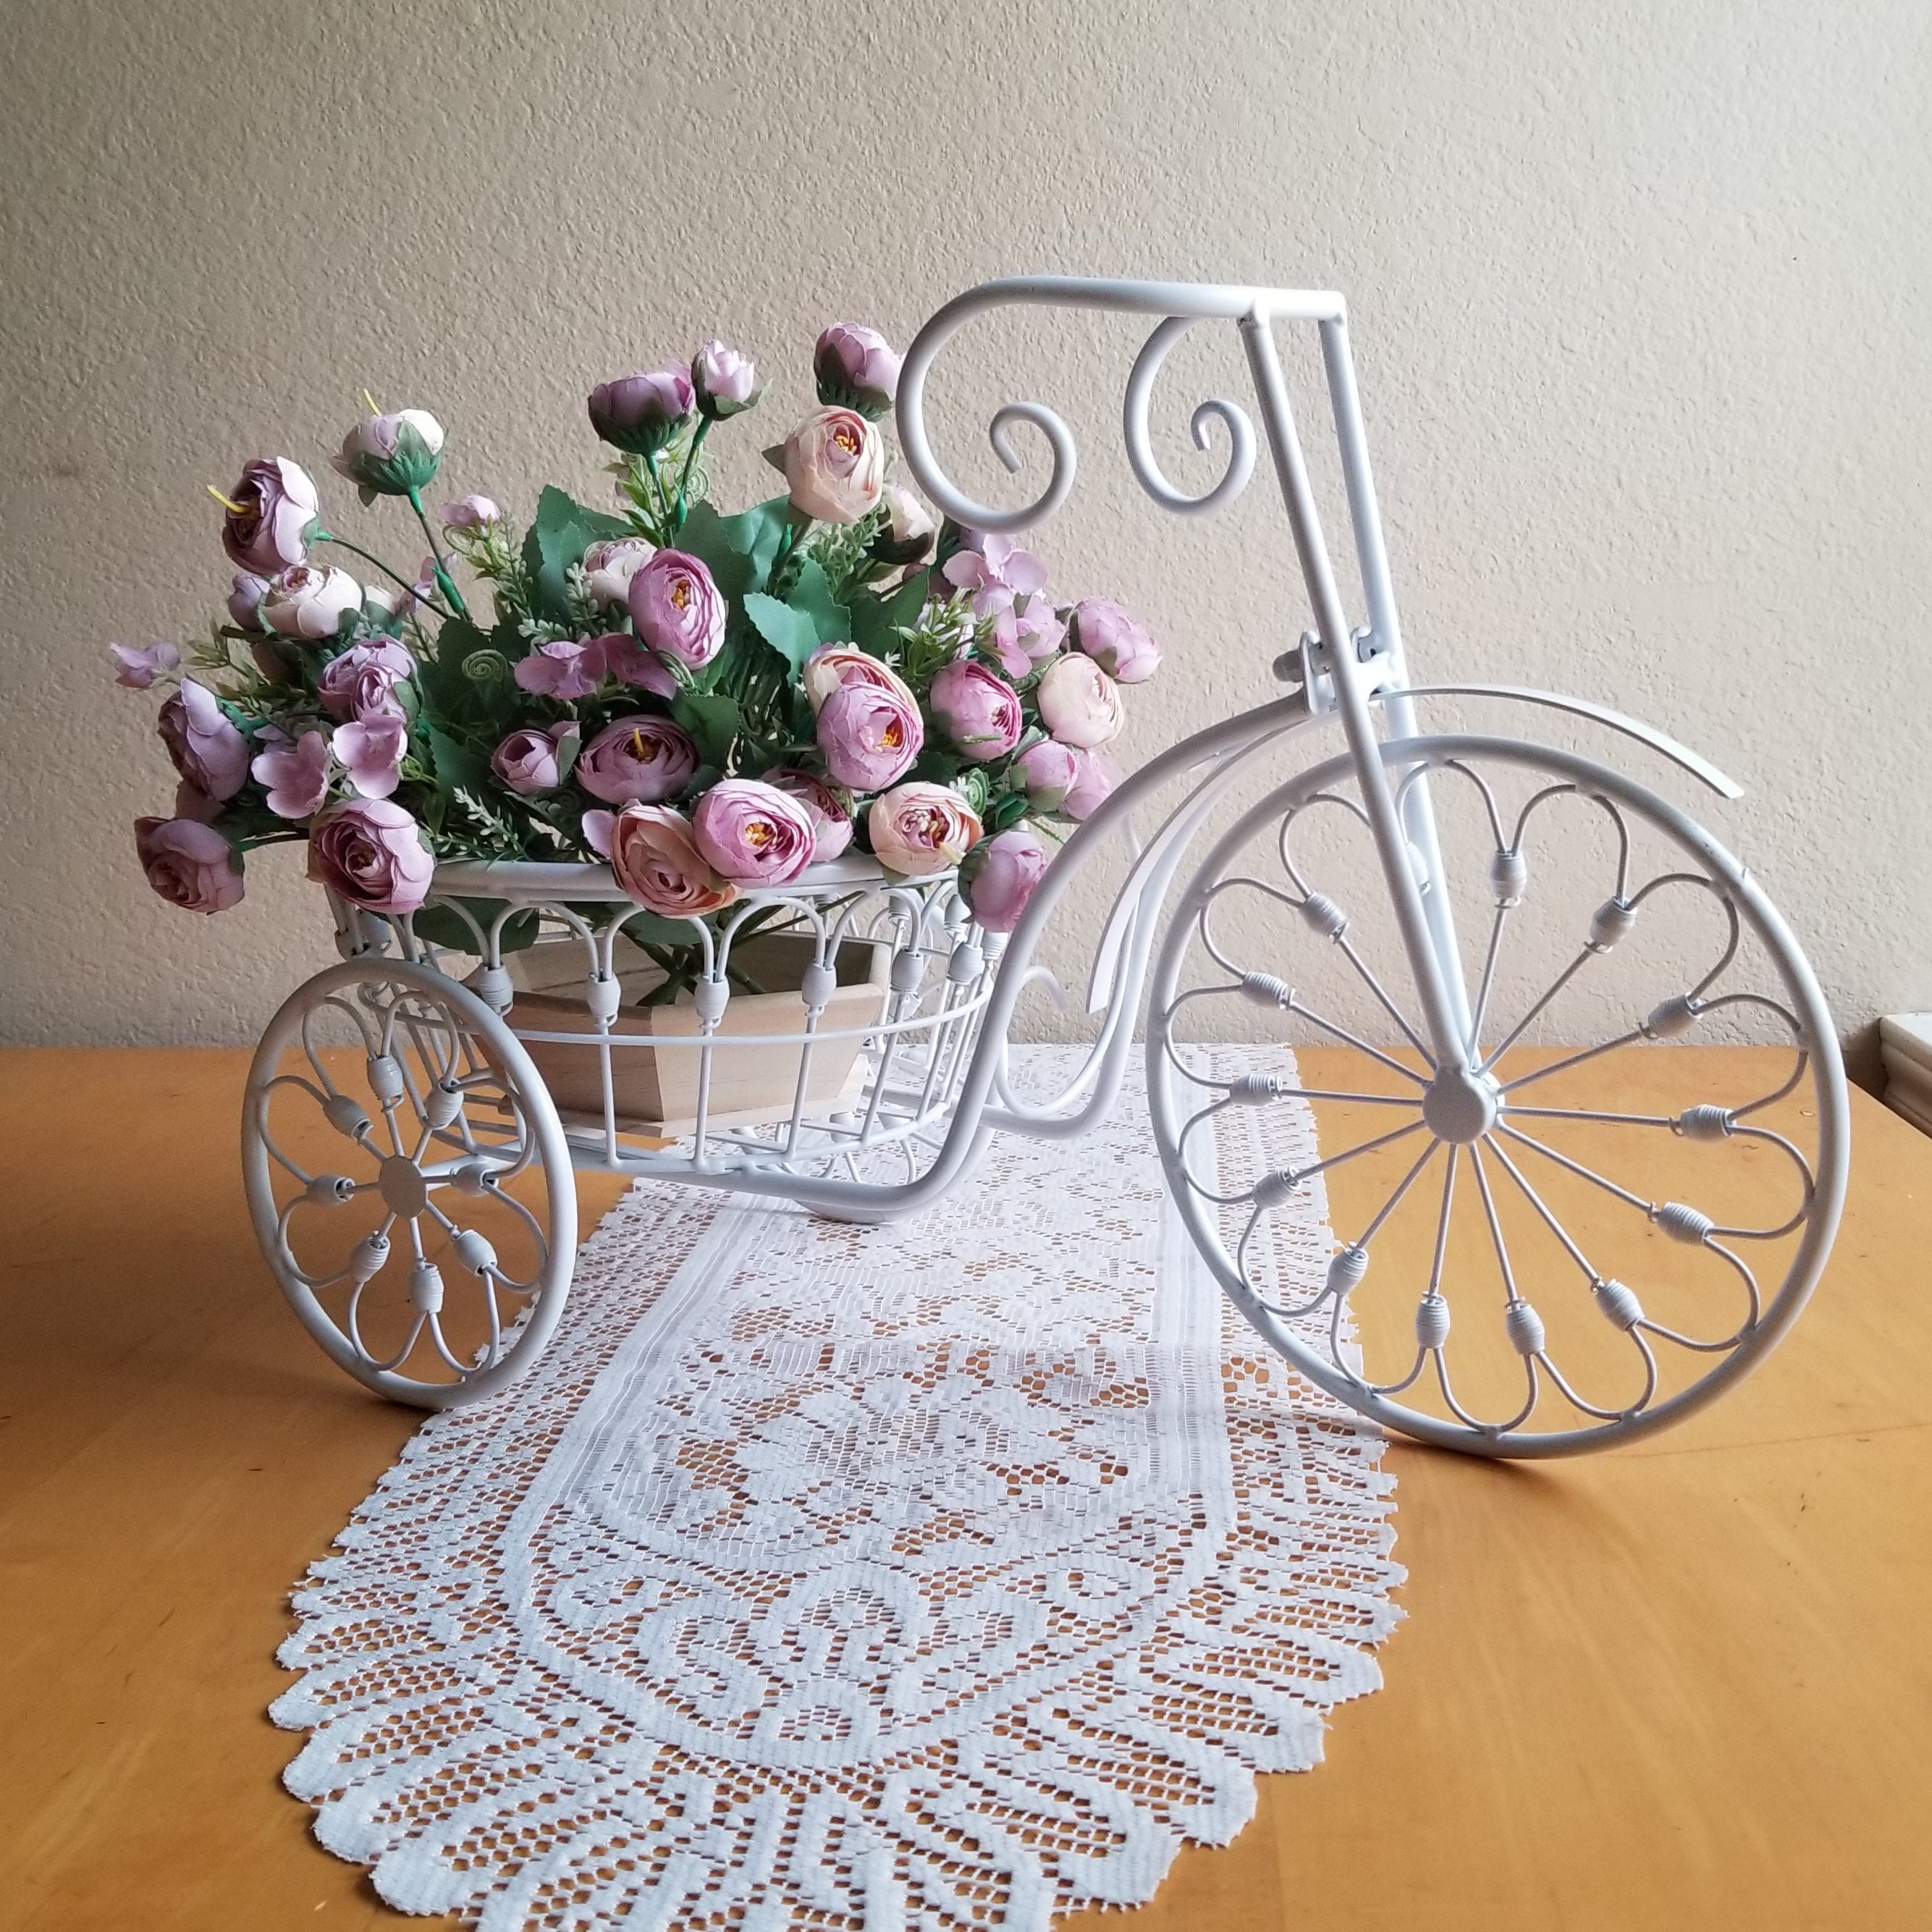 BSD National Supplies Vintage Style Bicycle Flower Holder, White